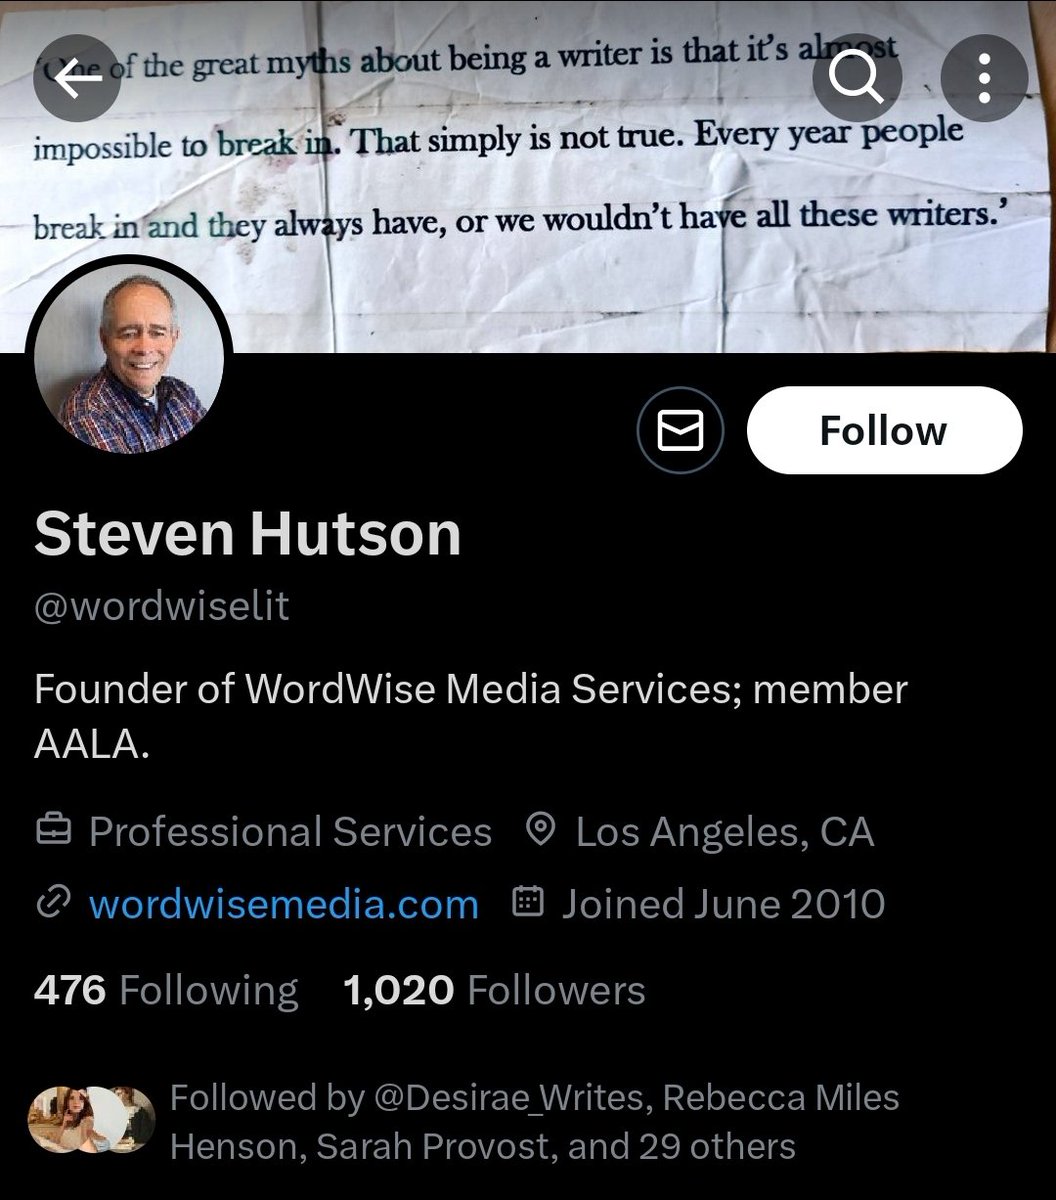 My darling ##amquerying writers, please make sure you block this man and do not query him. The only reason I don't have him blocked is so I can see when he has commented on something and can warn potential victims.